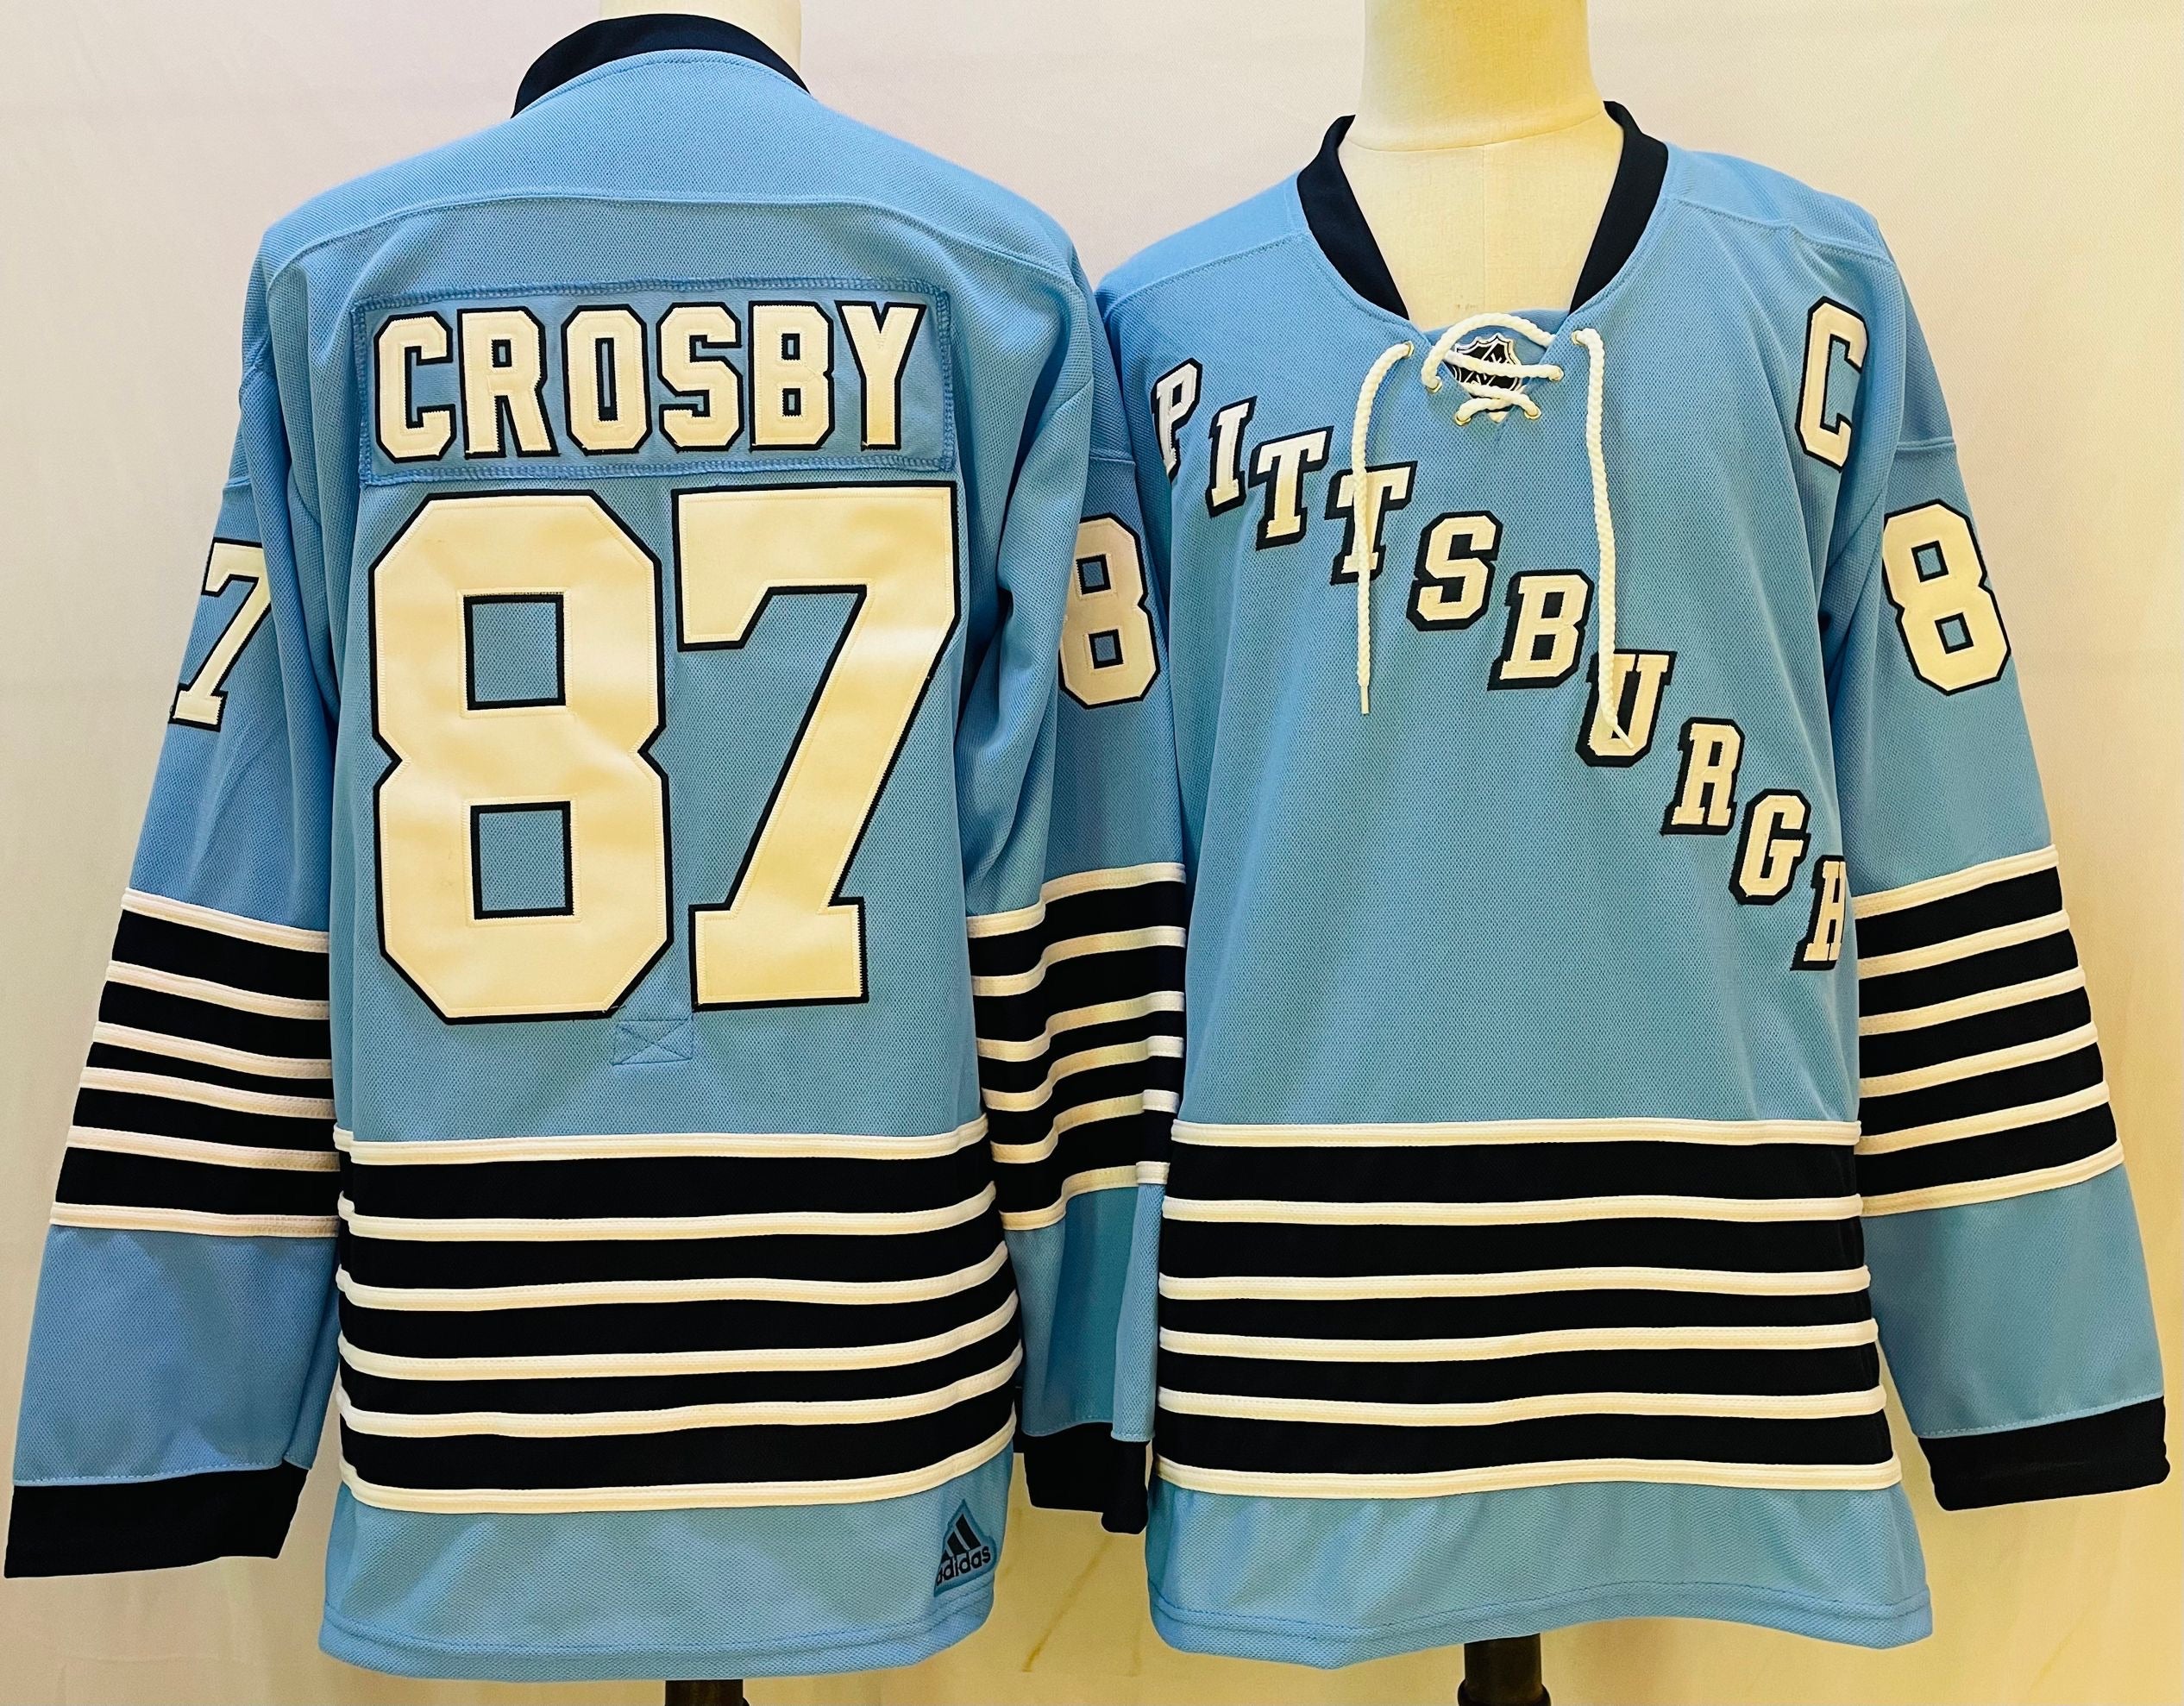 Sidney Crosby in retro Pittsburgh Penguins jersey from Adidas 